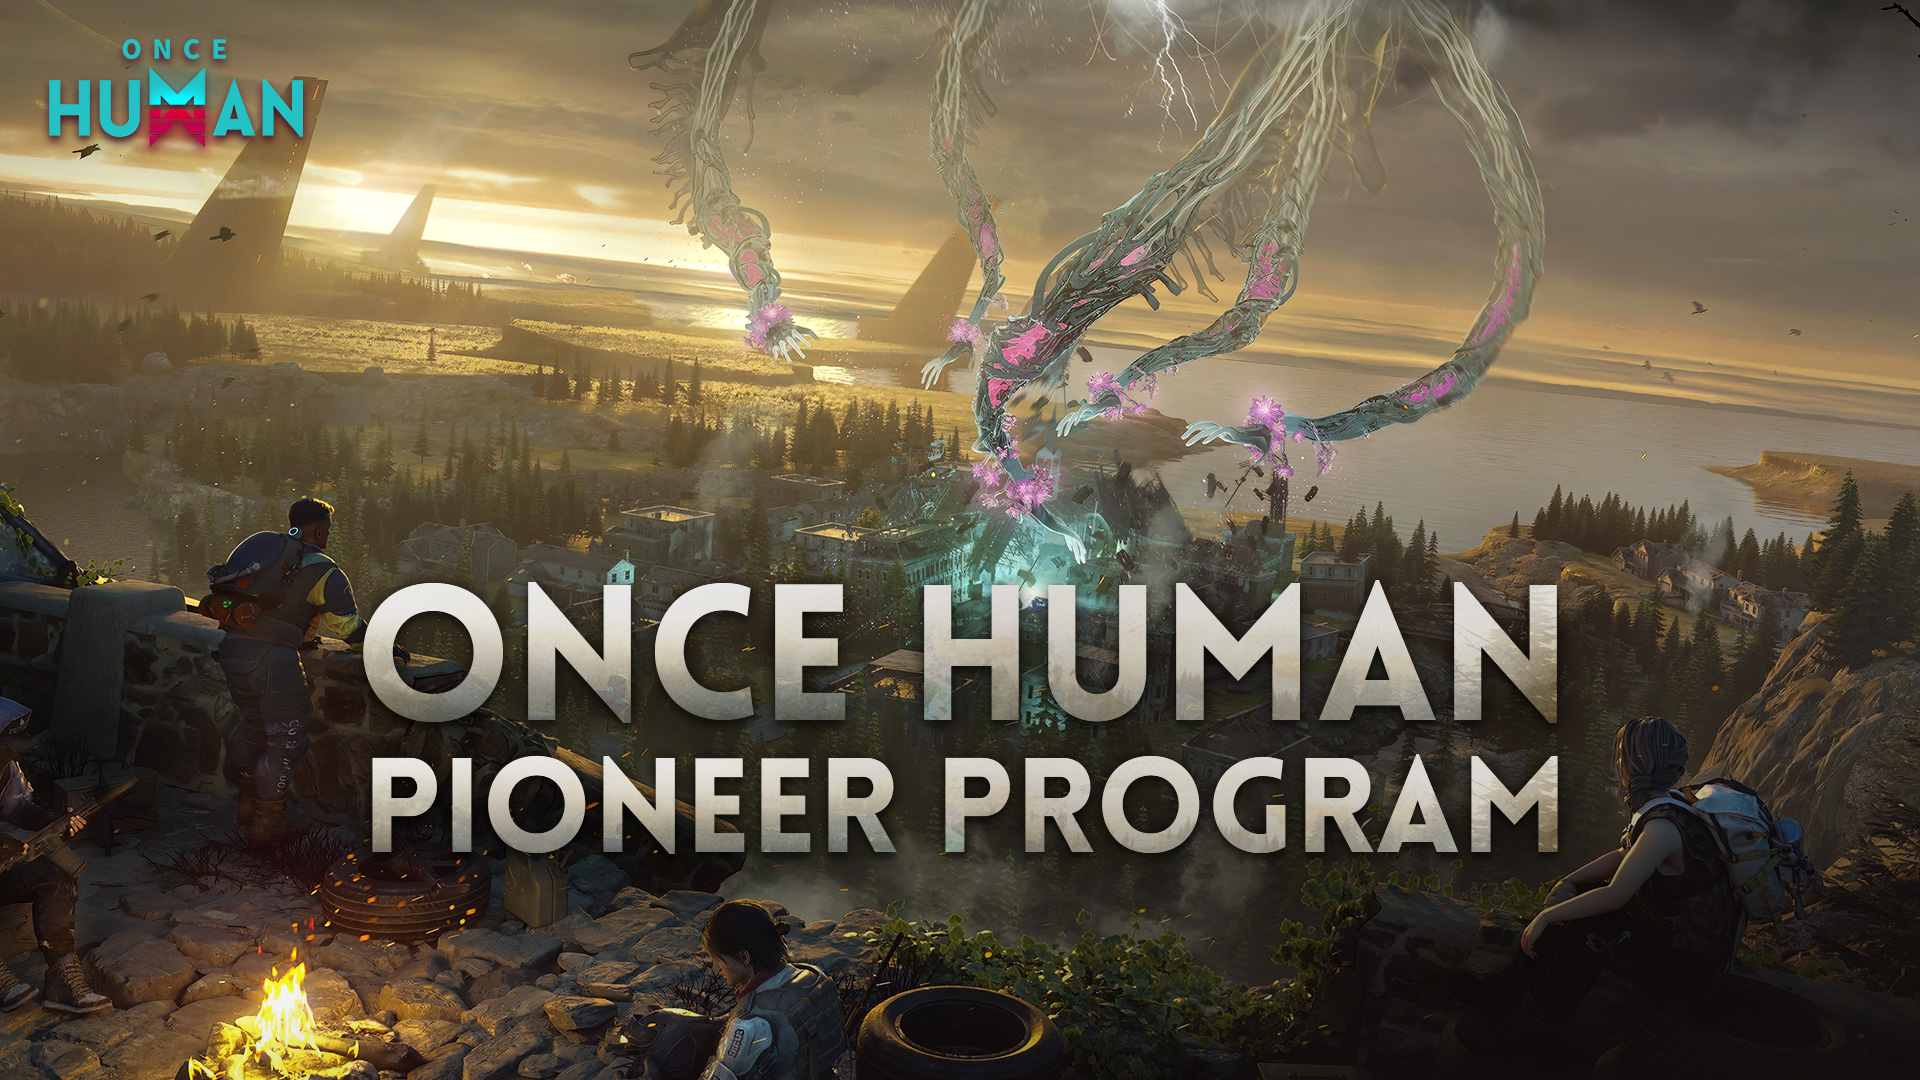 ONCE HUMAN PIONEER PROGRAM: POST A VIDEO AND GET CASH REWARDS!